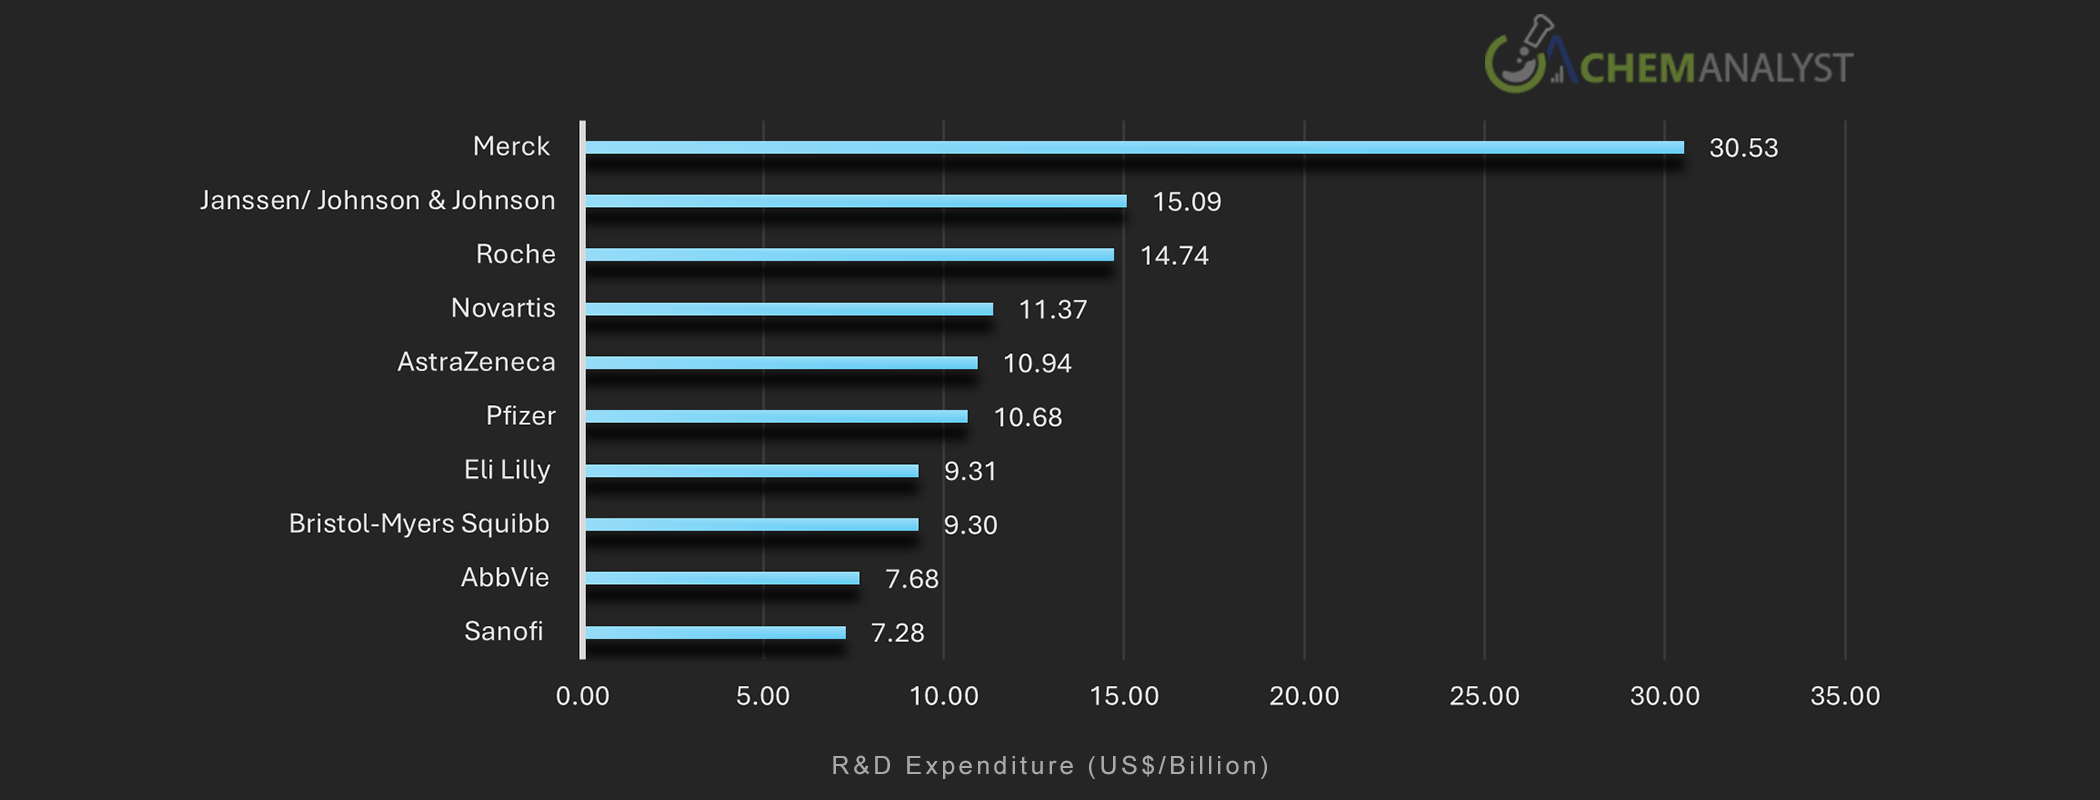 Top 10 Companies by R&D expenditure 